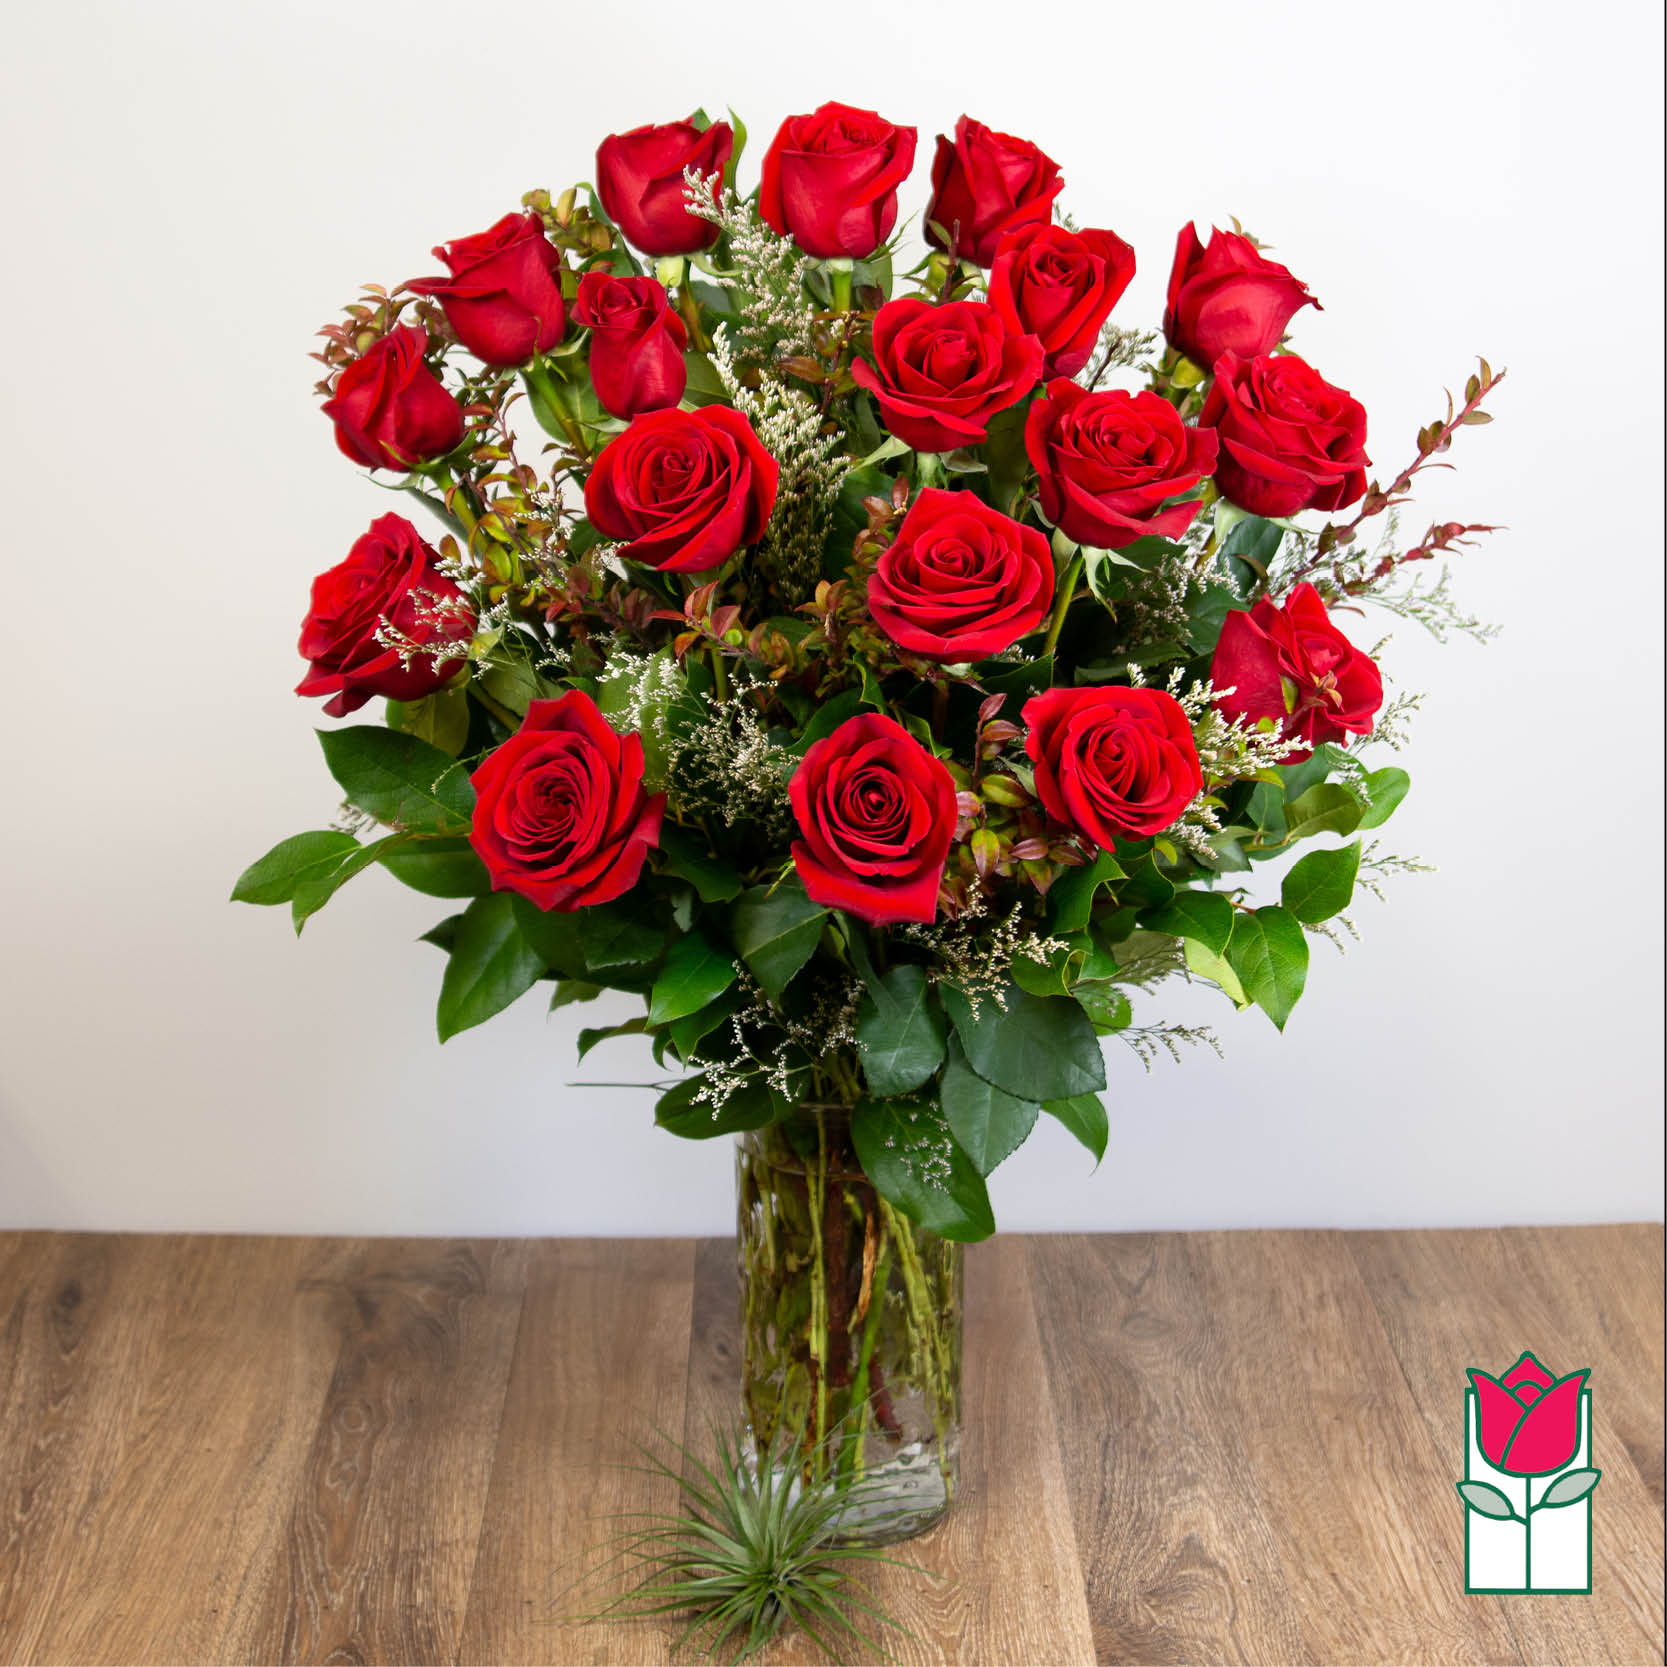 Beretania's 1.5 Doz. Extra Long Stem Red Rose Bouquet - 1.5 Dozen Premium Extra Long Stem Red Roses   Indulge in the timeless elegance of the Beretania Florist Premium Extra Long Stem Roses bouquet. Our exquisite bouquet features premium Ecuadorian extra-fancy roses, which are 30% larger than any other rose in the islands. Available in a classic glass vase with assorted foliage and filler flowers, this bouquet is the perfect gift for any occasion.  But our exceptional product is only half the story. At Beretania Florist, we pride ourselves on our professional and convenient delivery service. We carefully hand-deliver each bouquet to ensure it arrives at its destination in pristine condition. Our team is dedicated to providing the highest level of customer service, and we strive to exceed your expectations with every order.  And for added convenience, we offer the option to choose or upgrade the number of roses in your bouquet. Whether you prefer a classic one dozen, a stunning one and a half dozen, a grand two dozen, or an opulent three dozen, we have the perfect bouquet for you.  Trust Beretania Florist to deliver the highest quality roses and the best service in the Honolulu area.